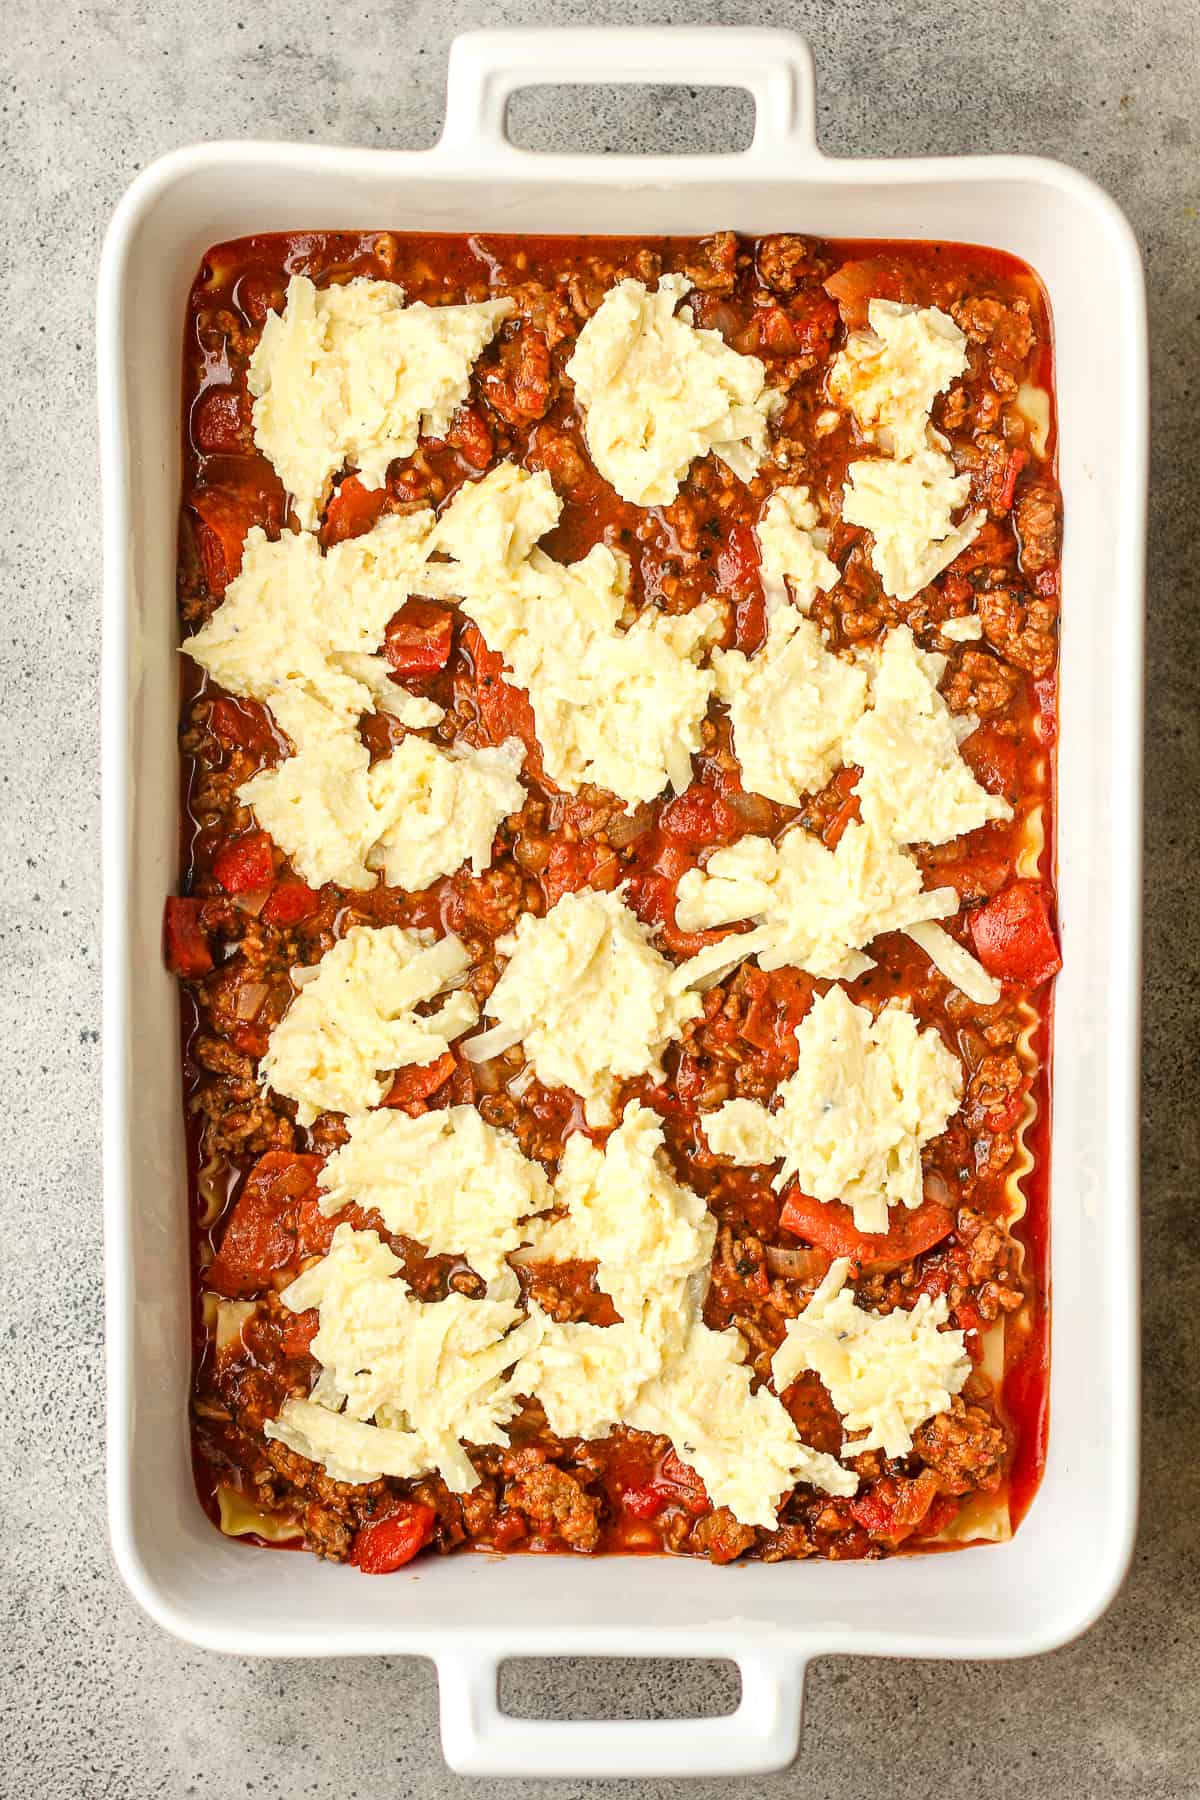 A casserole dish of the lasagna with the ricotta cheese mixture on top.